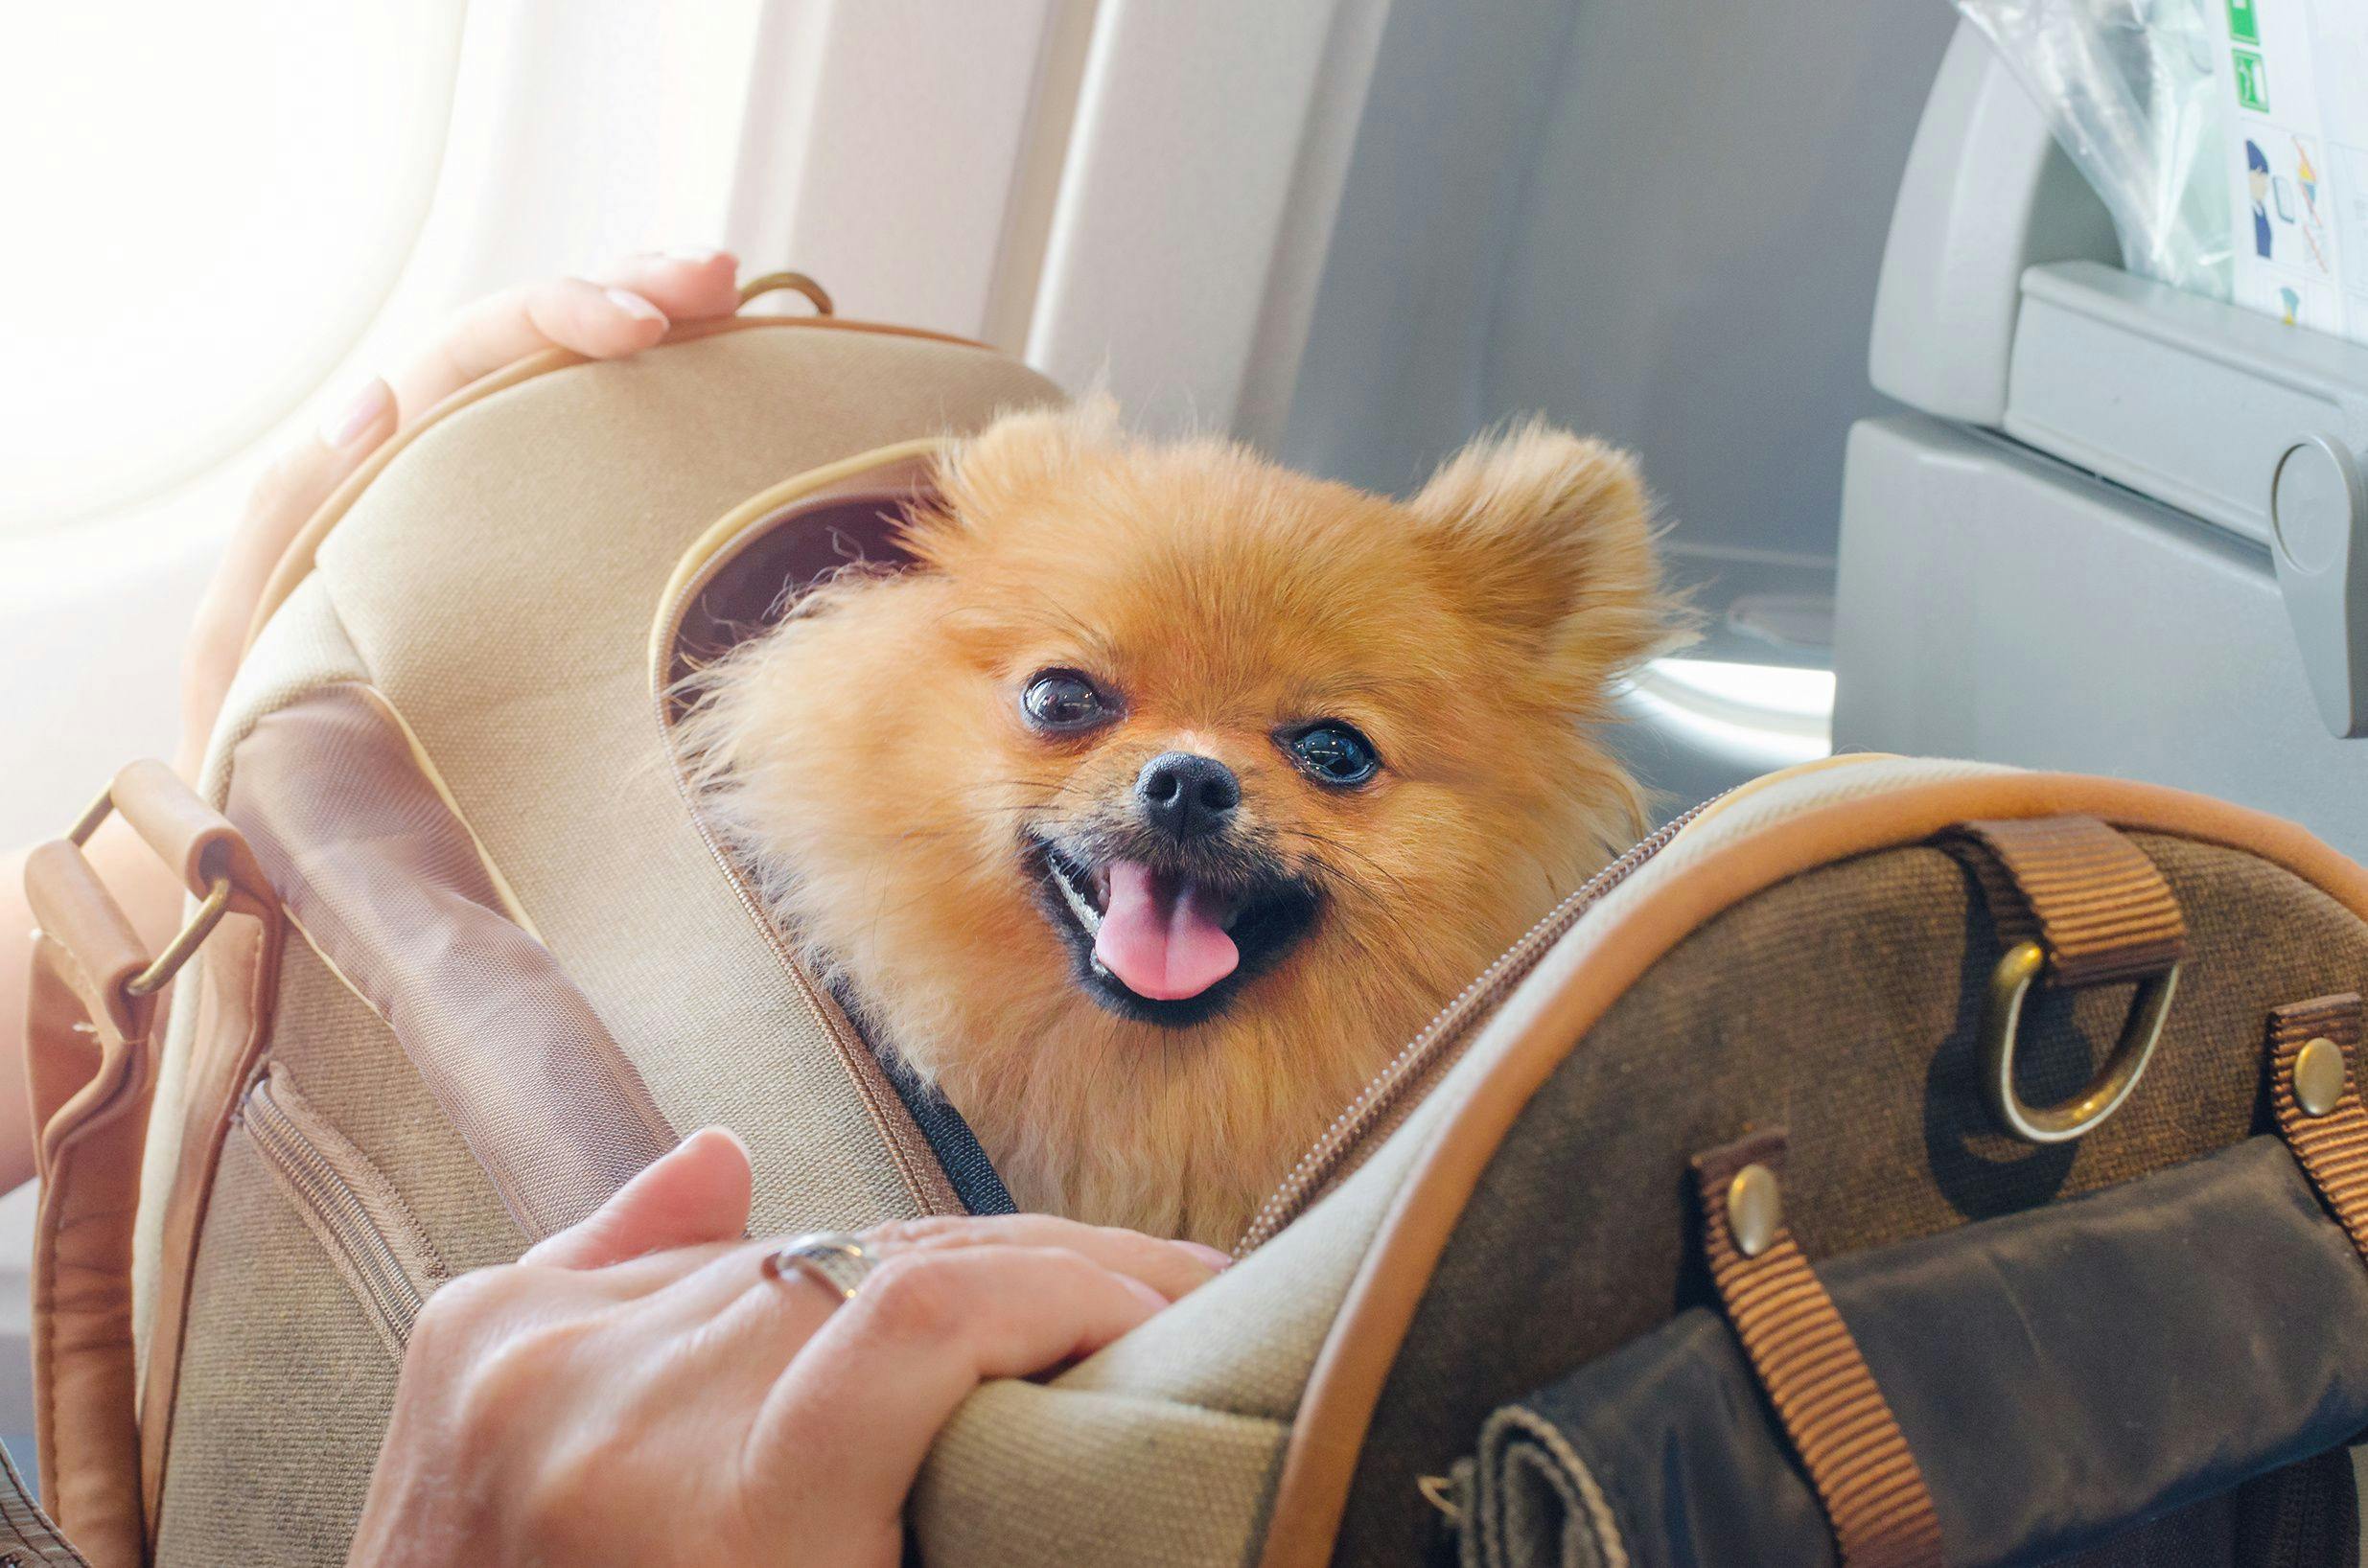 Up in the air: DOT defines rules about service animals on commercial flights